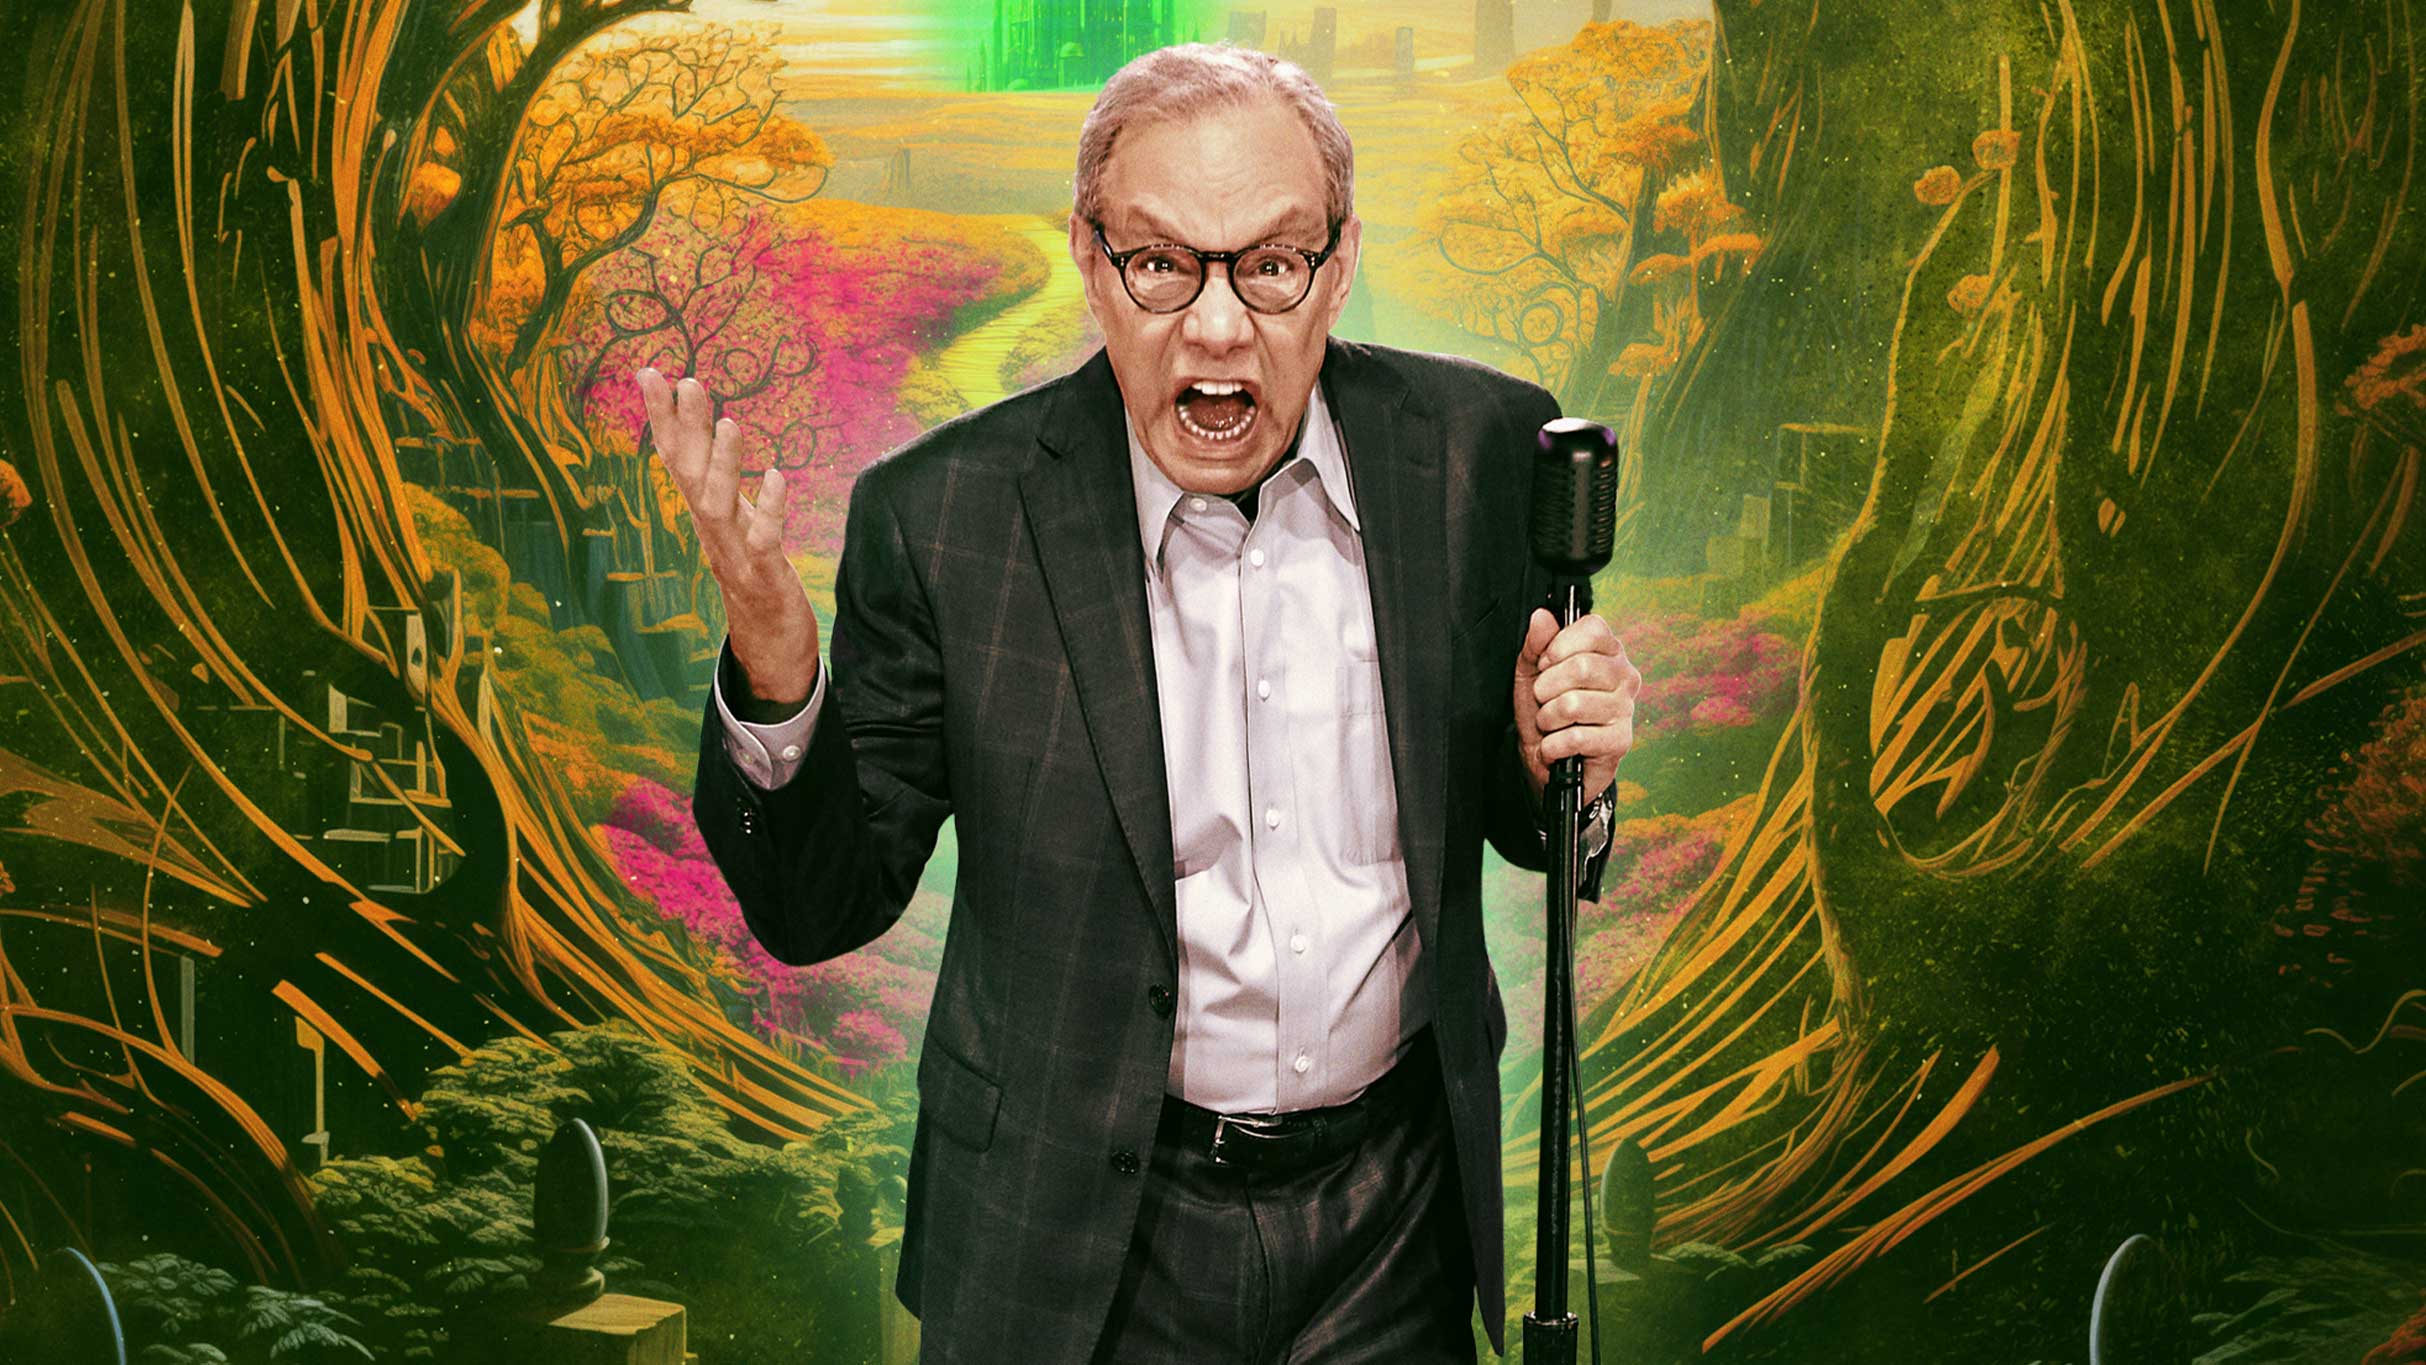 Lewis Black: Goodbye Yeller Brick Road, The Final Tour free presale code for show tickets in Boston, MA (The Wilbur)